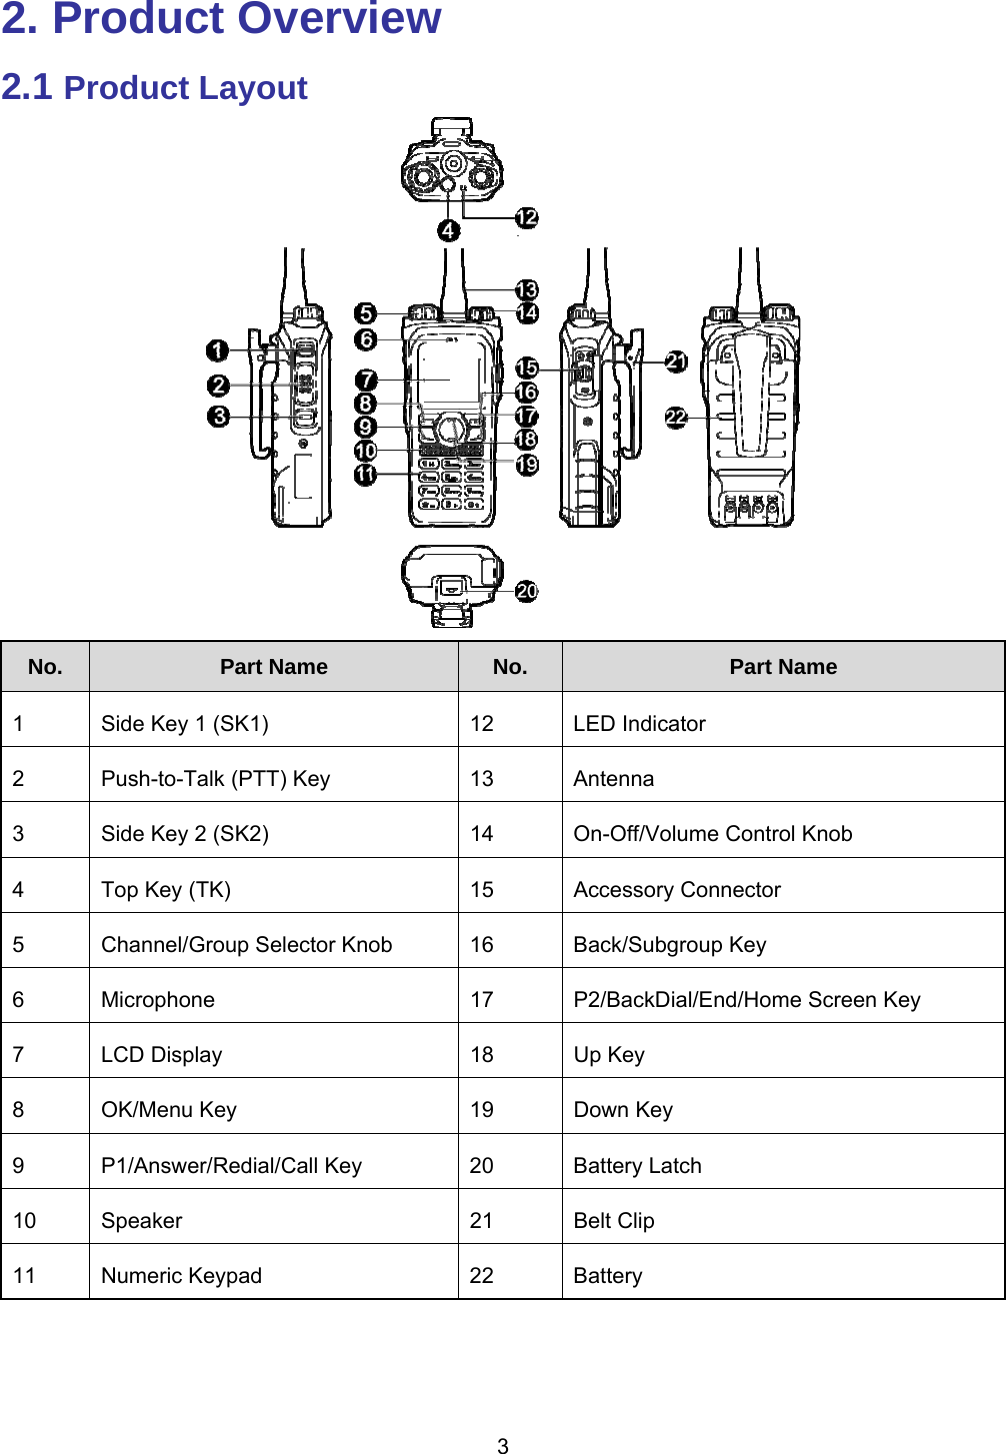  3  2. Product Overview 2.1 Product Layout  No.  Part Name  No.  Part Name 1  Side Key 1 (SK1)  12  LED Indicator 2  Push-to-Talk (PTT) Key  13  Antenna 3  Side Key 2 (SK2)  14  On-Off/Volume Control Knob 4  Top Key (TK)  15  Accessory Connector 5  Channel/Group Selector Knob  16  Back/Subgroup Key 6  Microphone  17  P2/BackDial/End/Home Screen Key 7  LCD Display  18  Up Key 8  OK/Menu Key  19  Down Key 9  P1/Answer/Redial/Call Key  20  Battery Latch 10 Speaker  21  Belt Clip 11 Numeric Keypad  22  Battery 